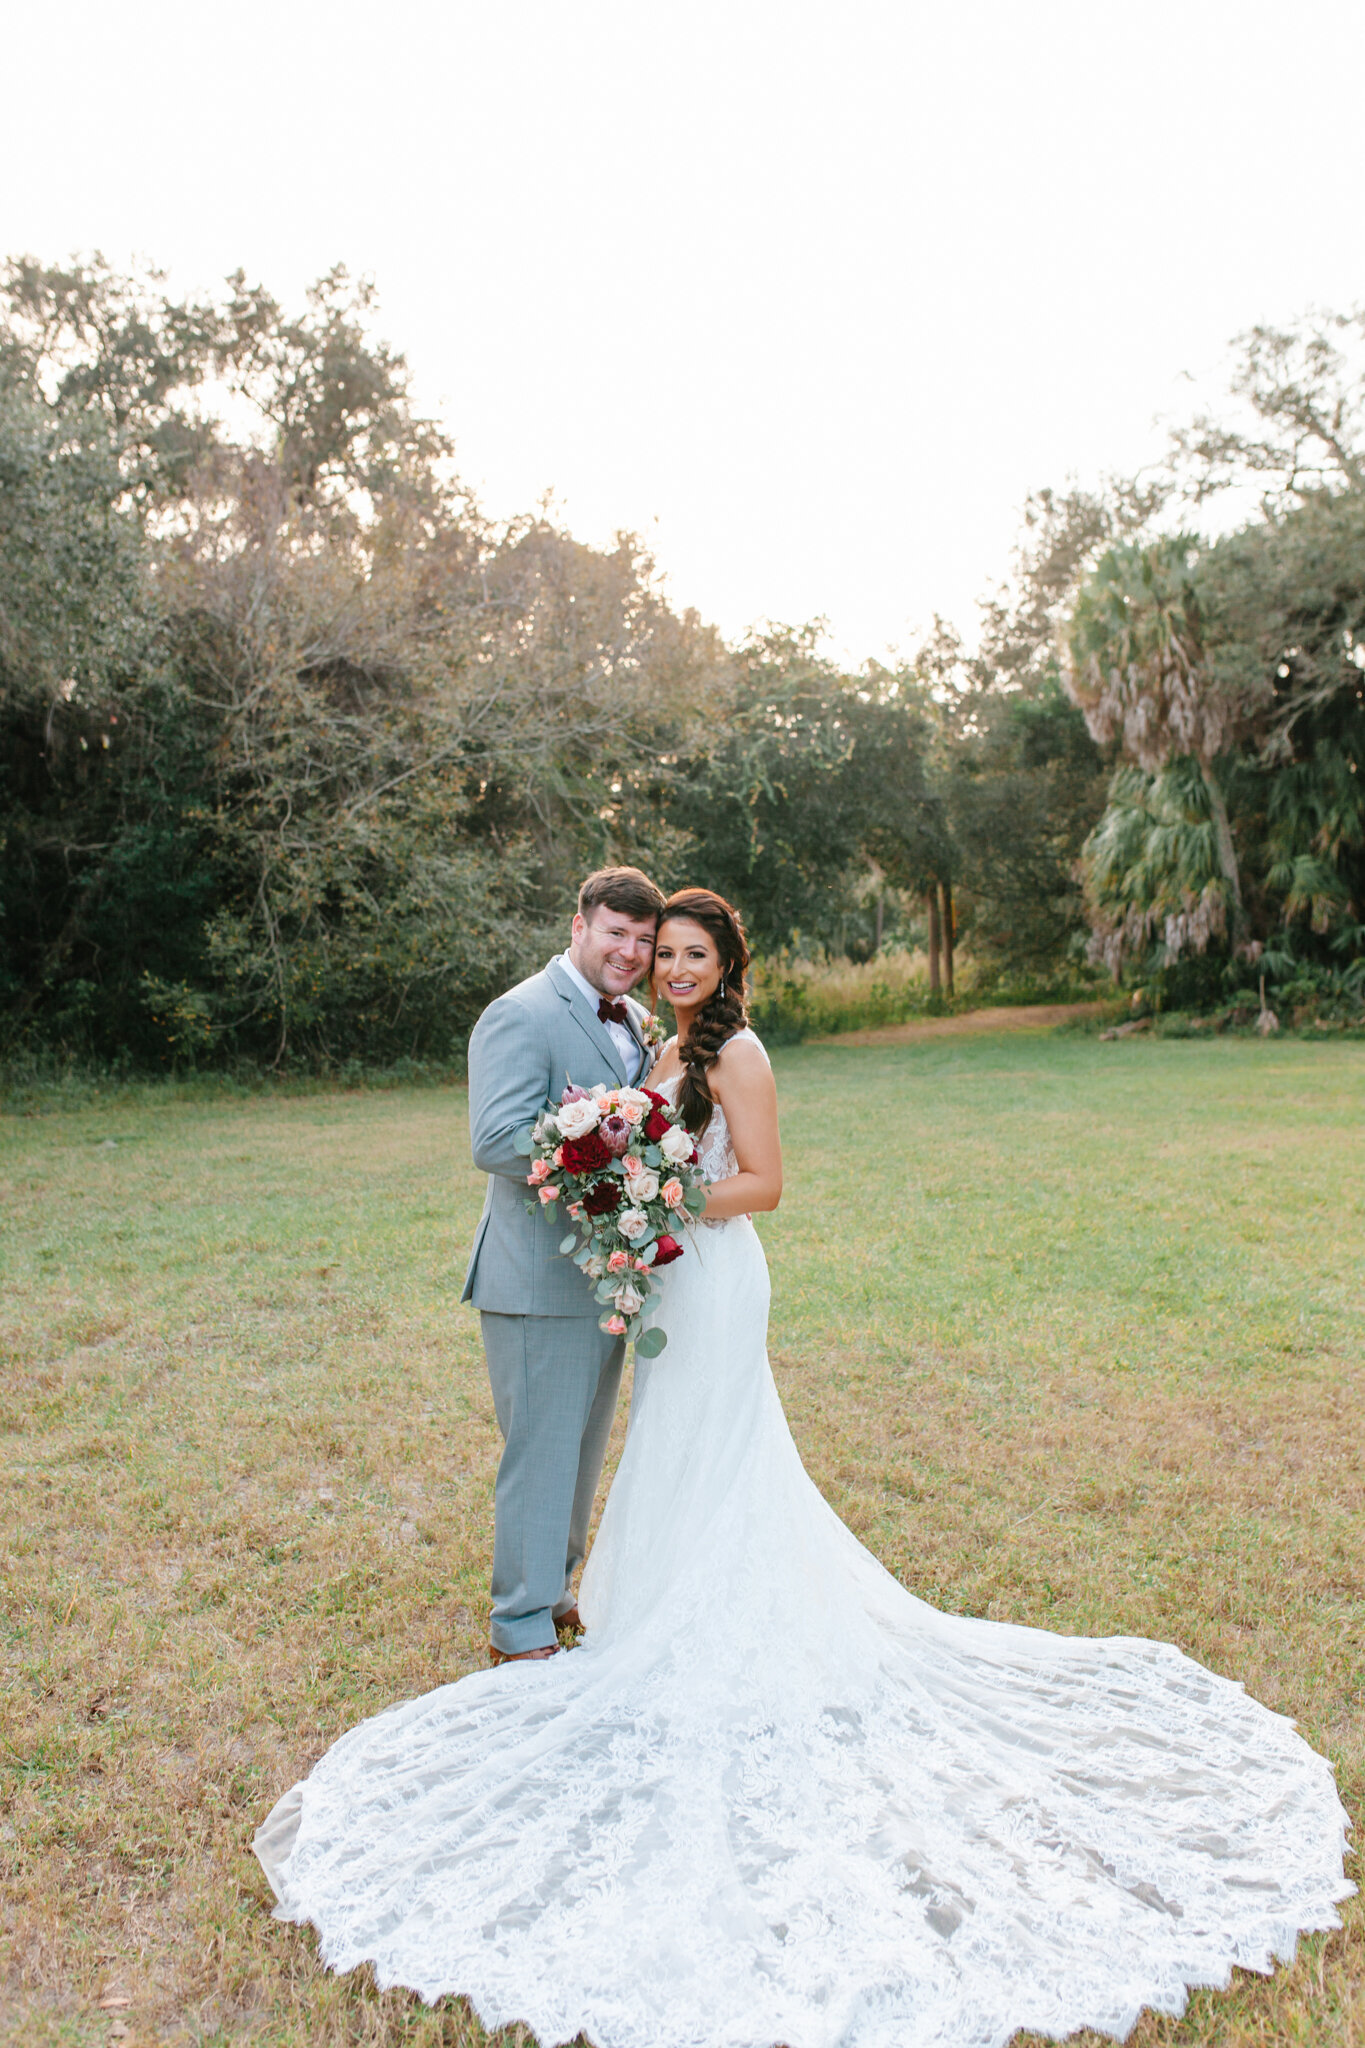 Rustic+wedding+photography+in+Central+Florida.jpg